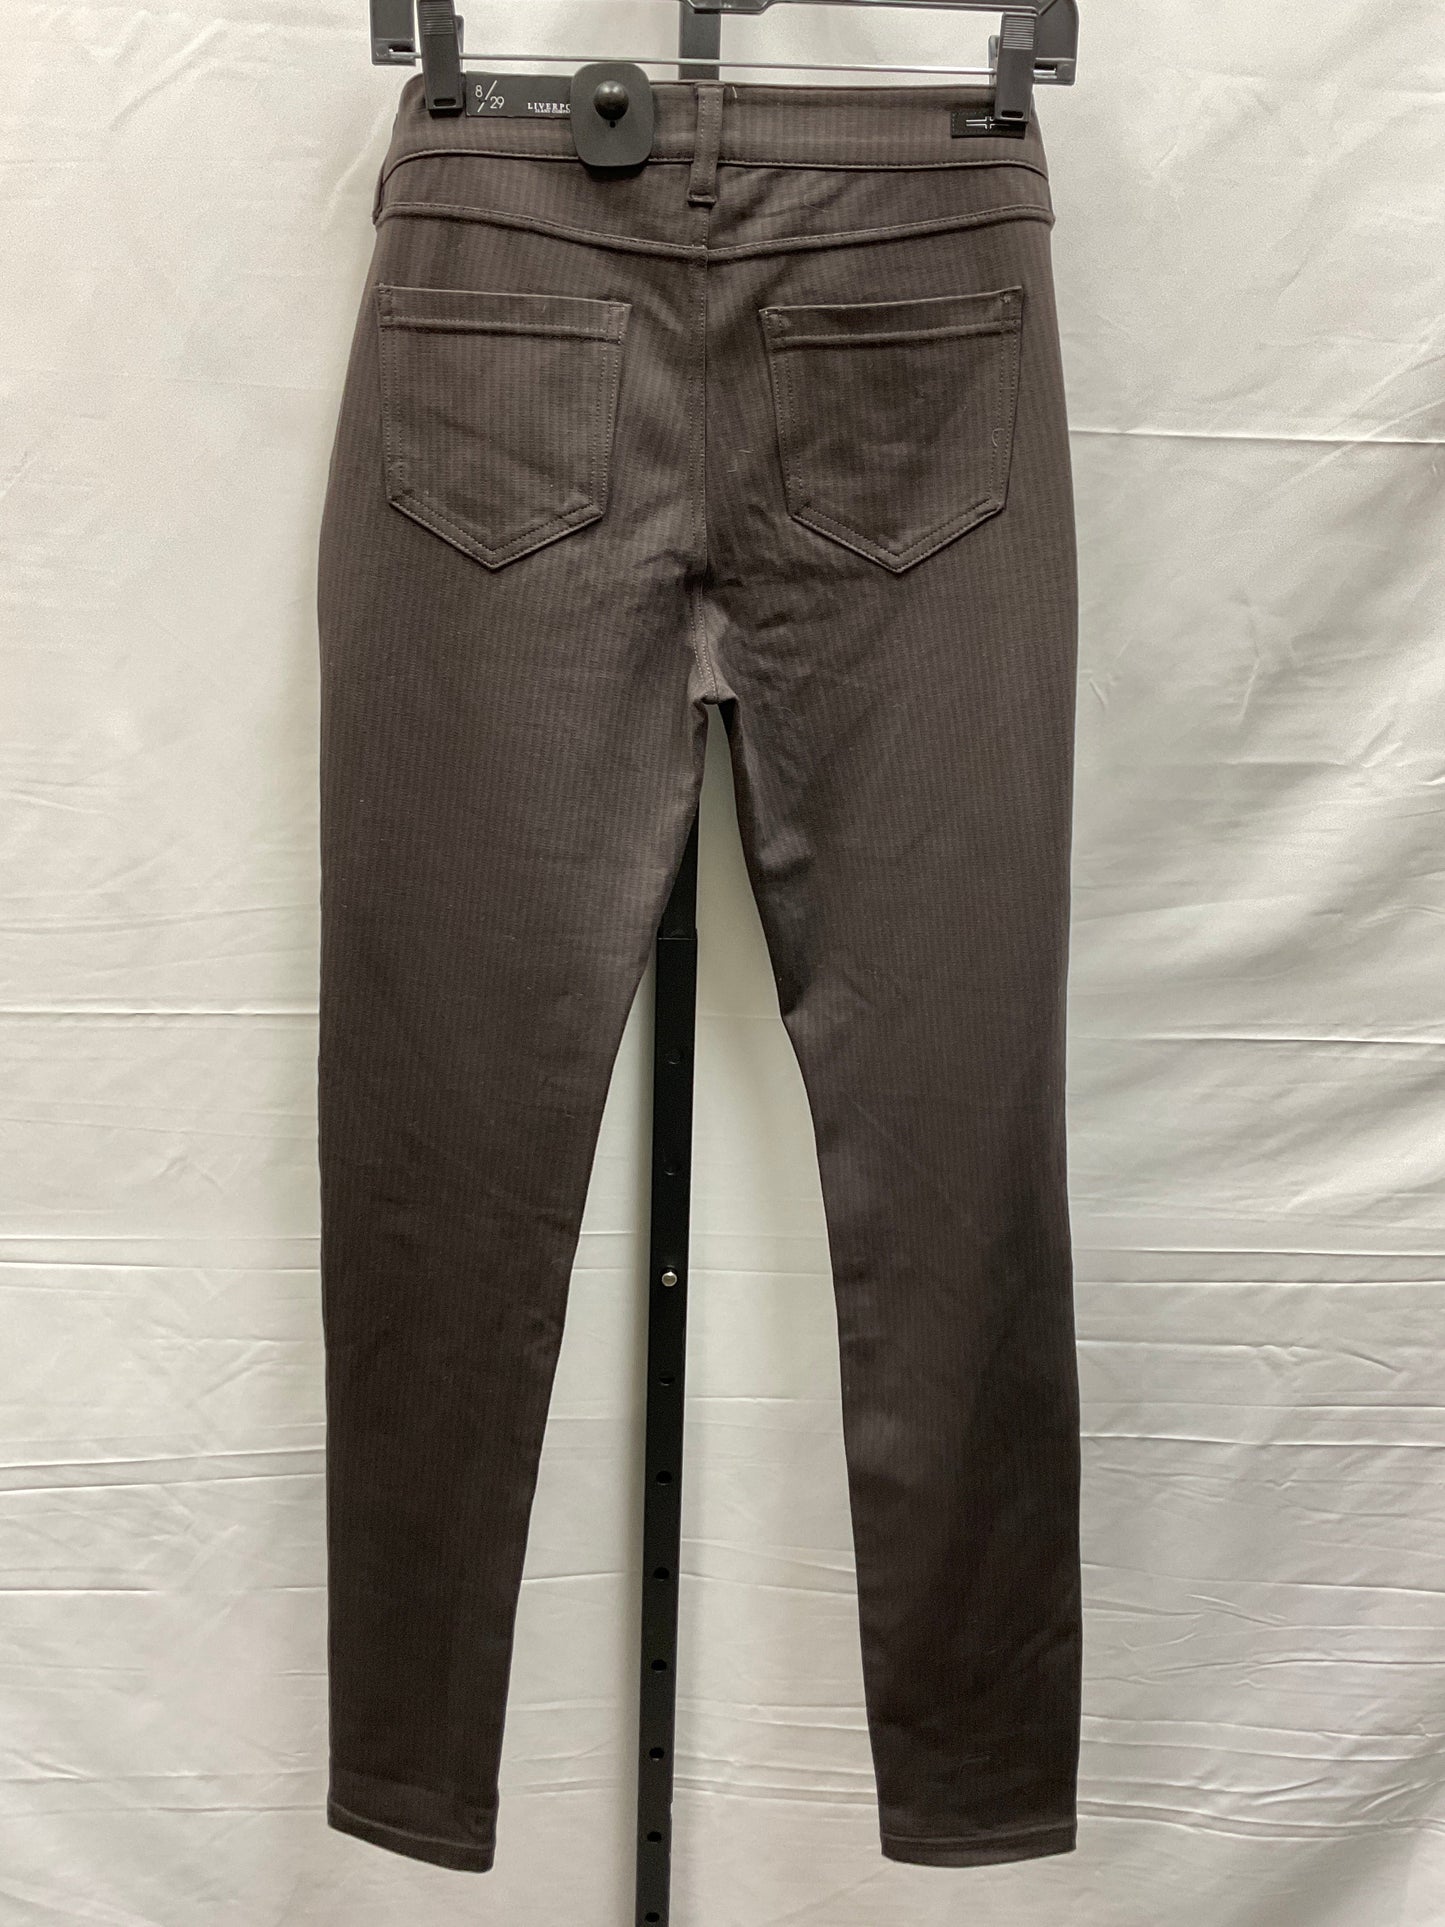 Black & Brown Pants Other Liverpool, Size 8